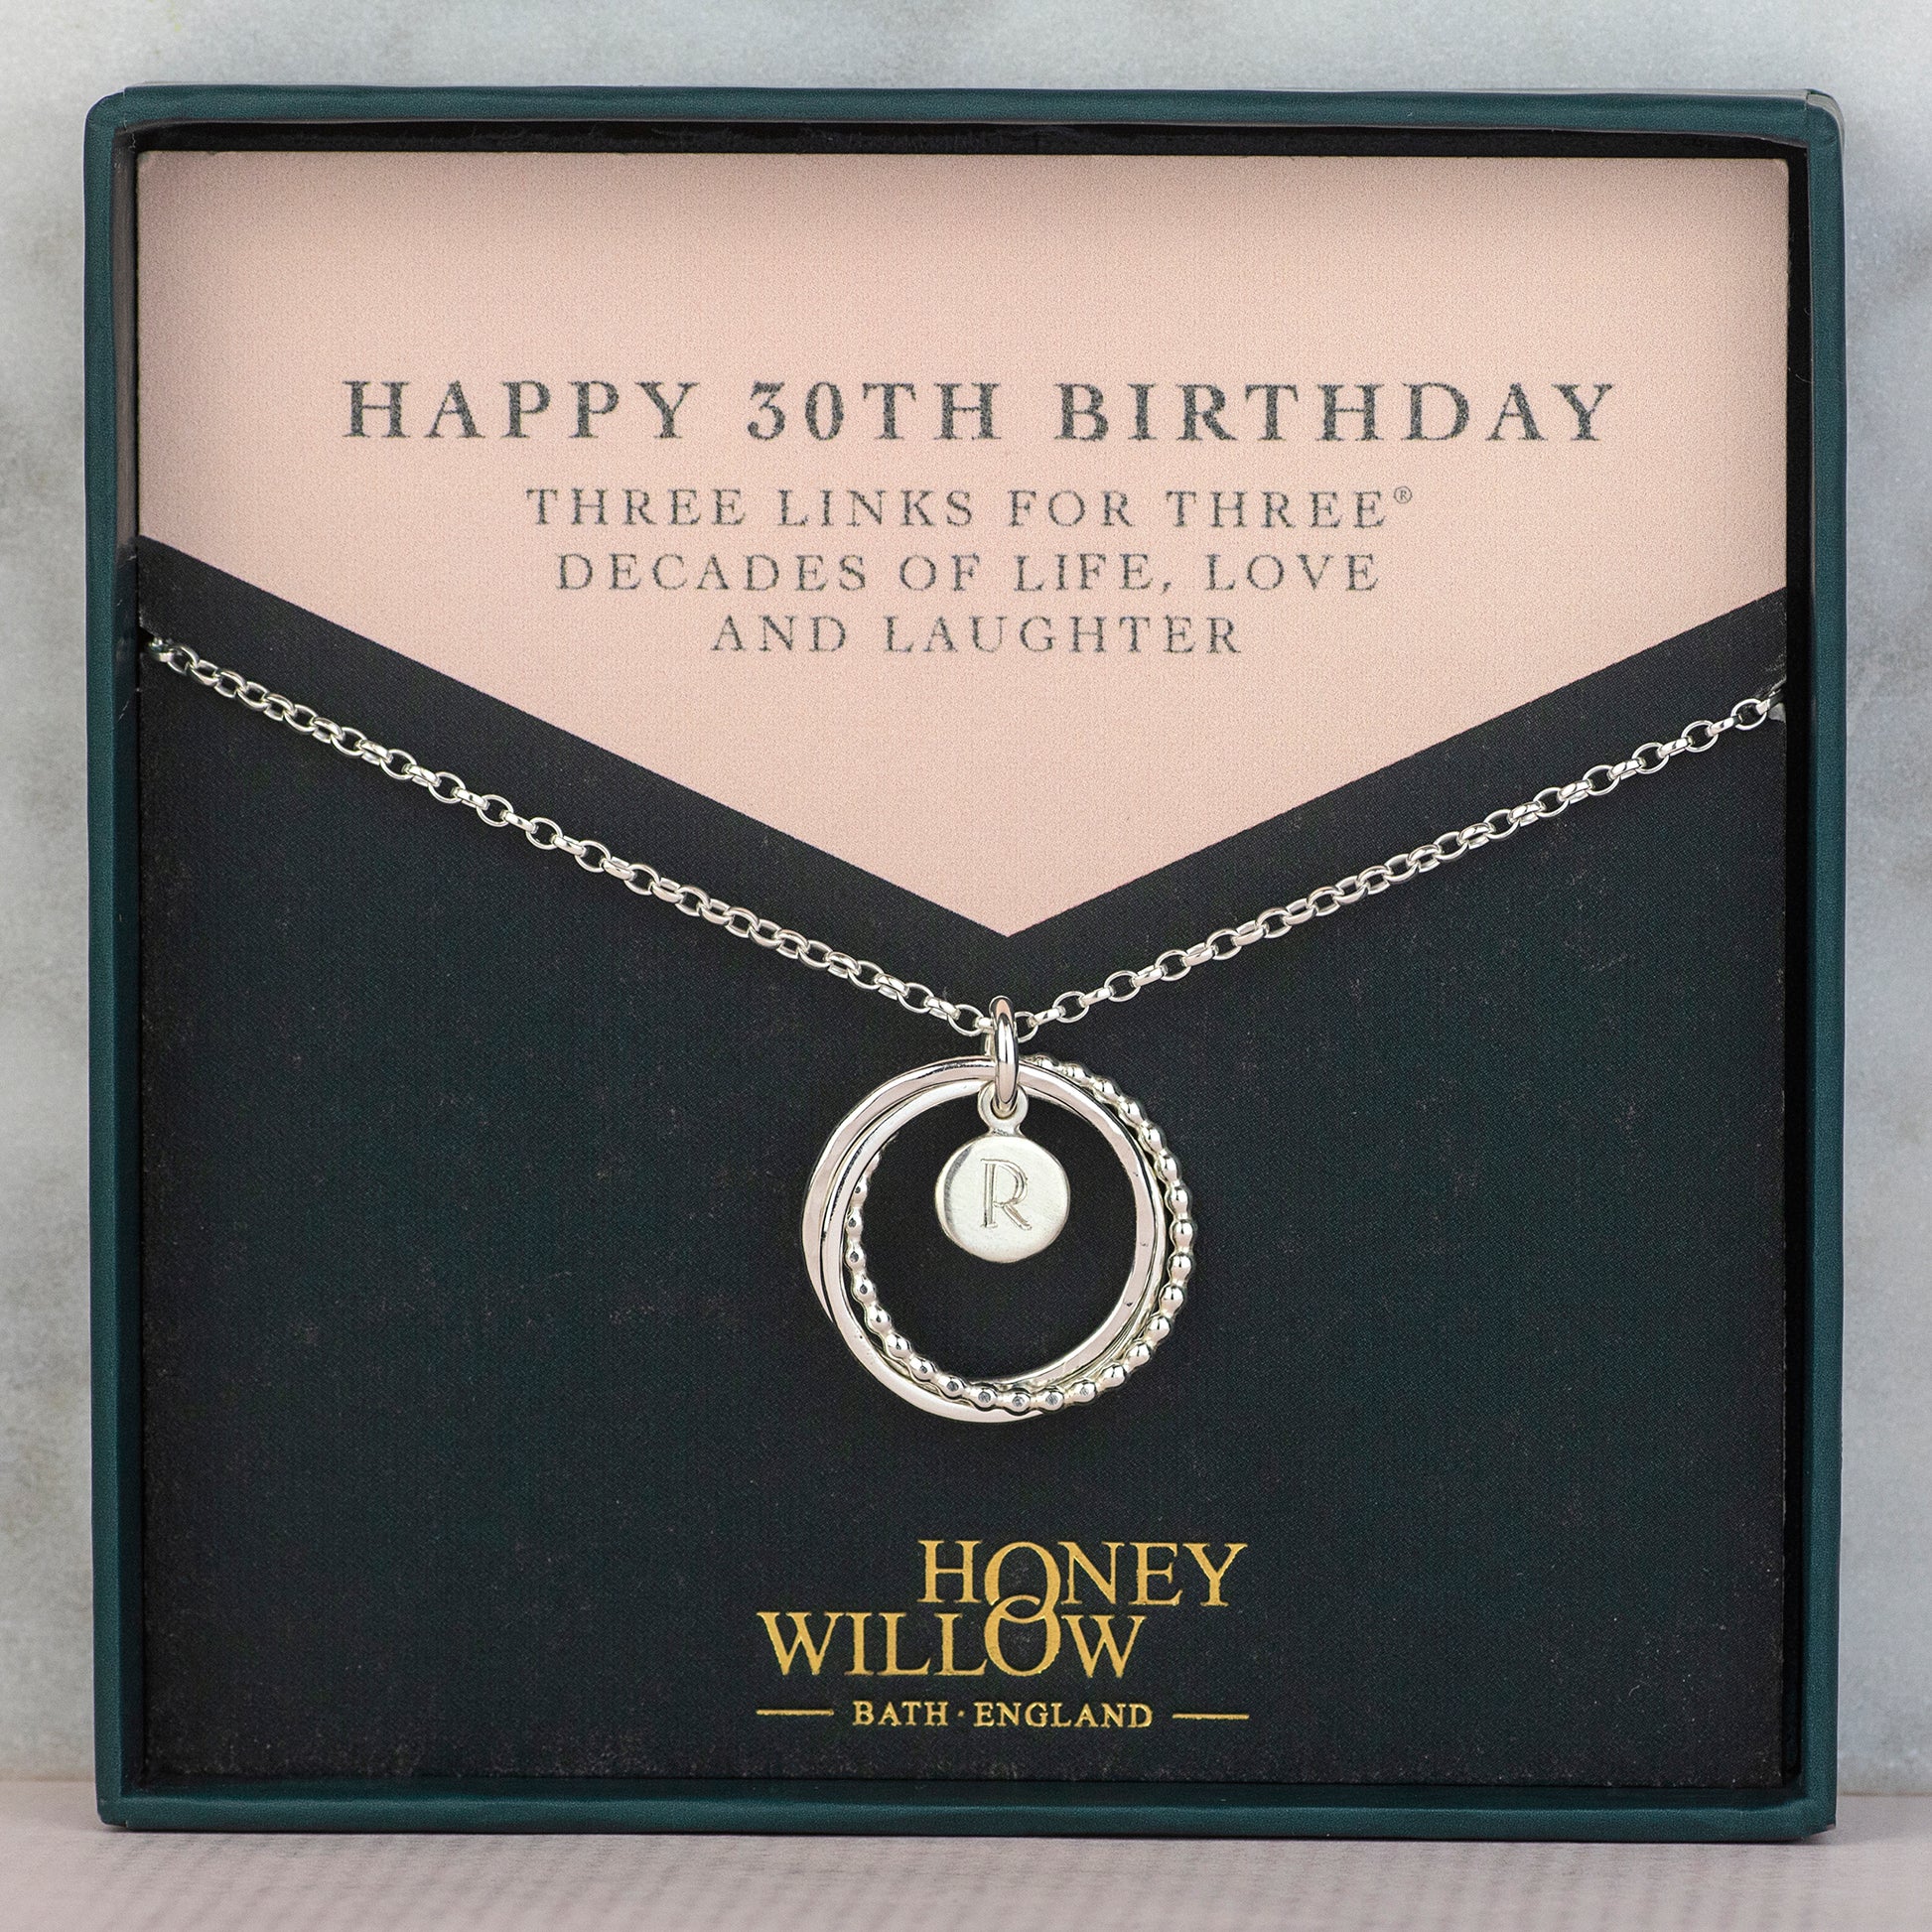 30th Birthday Initial Necklace - Silver - The Original 3 Links for 3® Decades Necklace